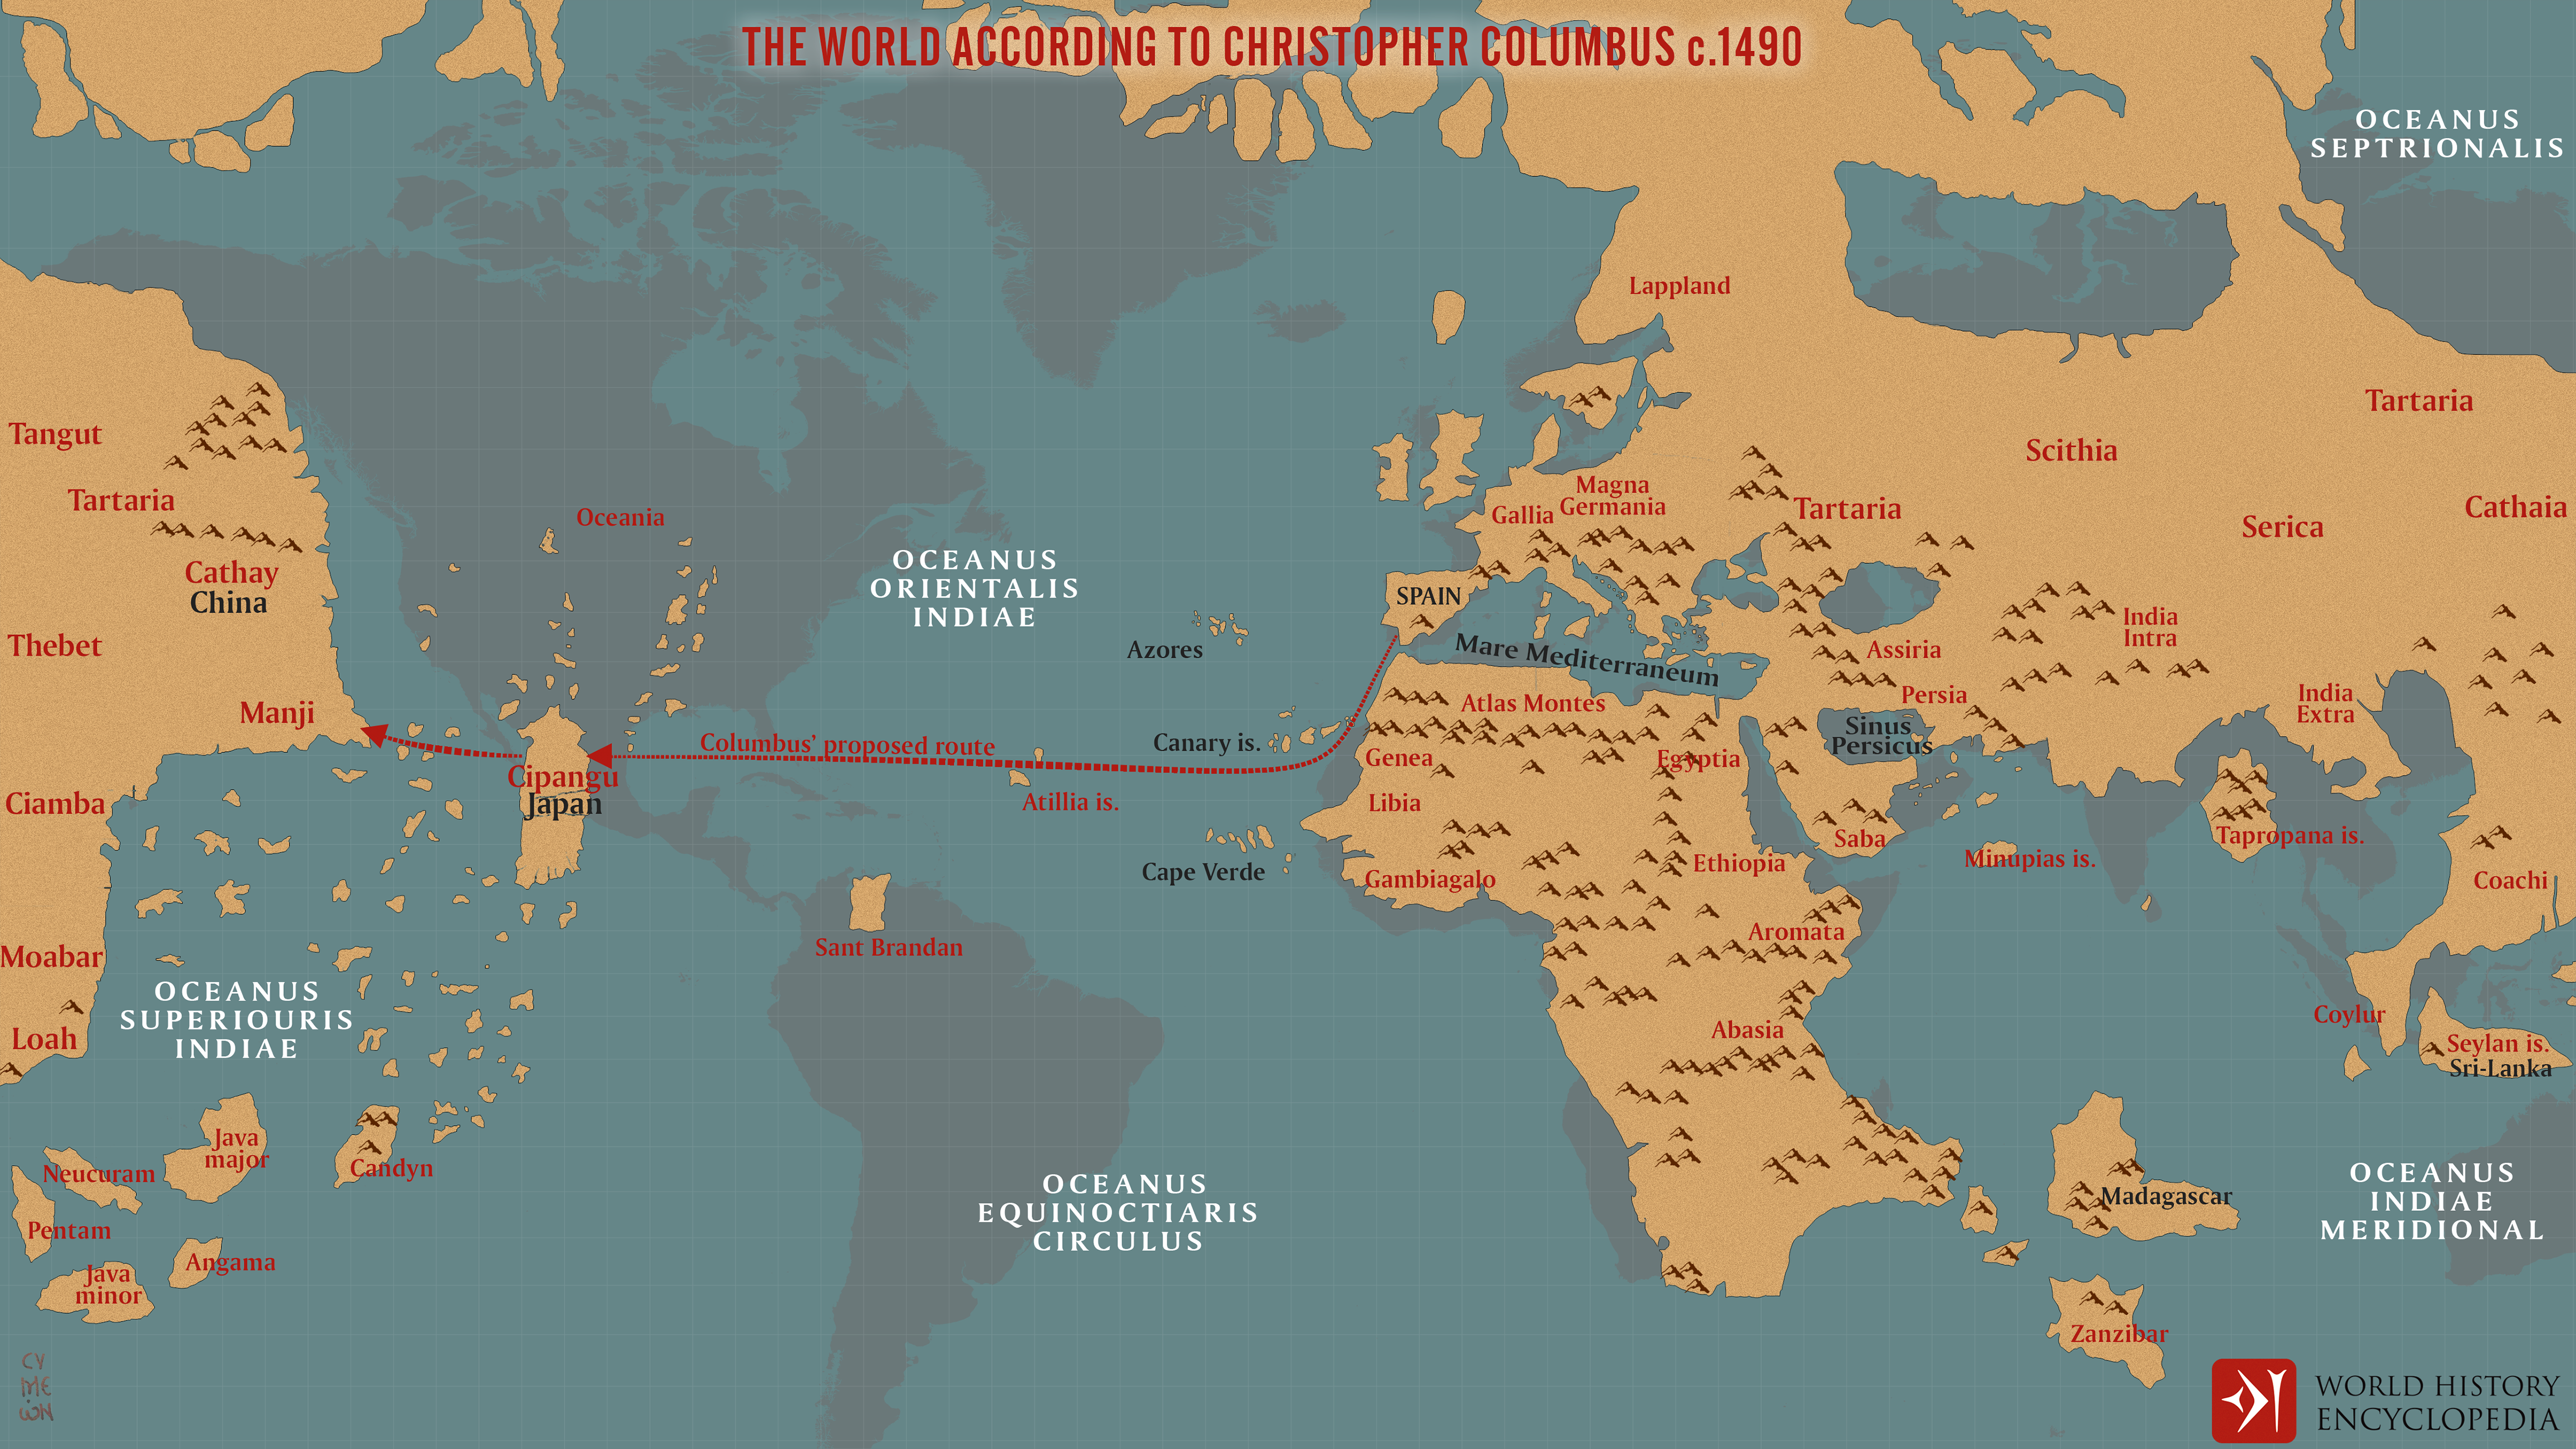 The Worlds of Christopher Columbus 